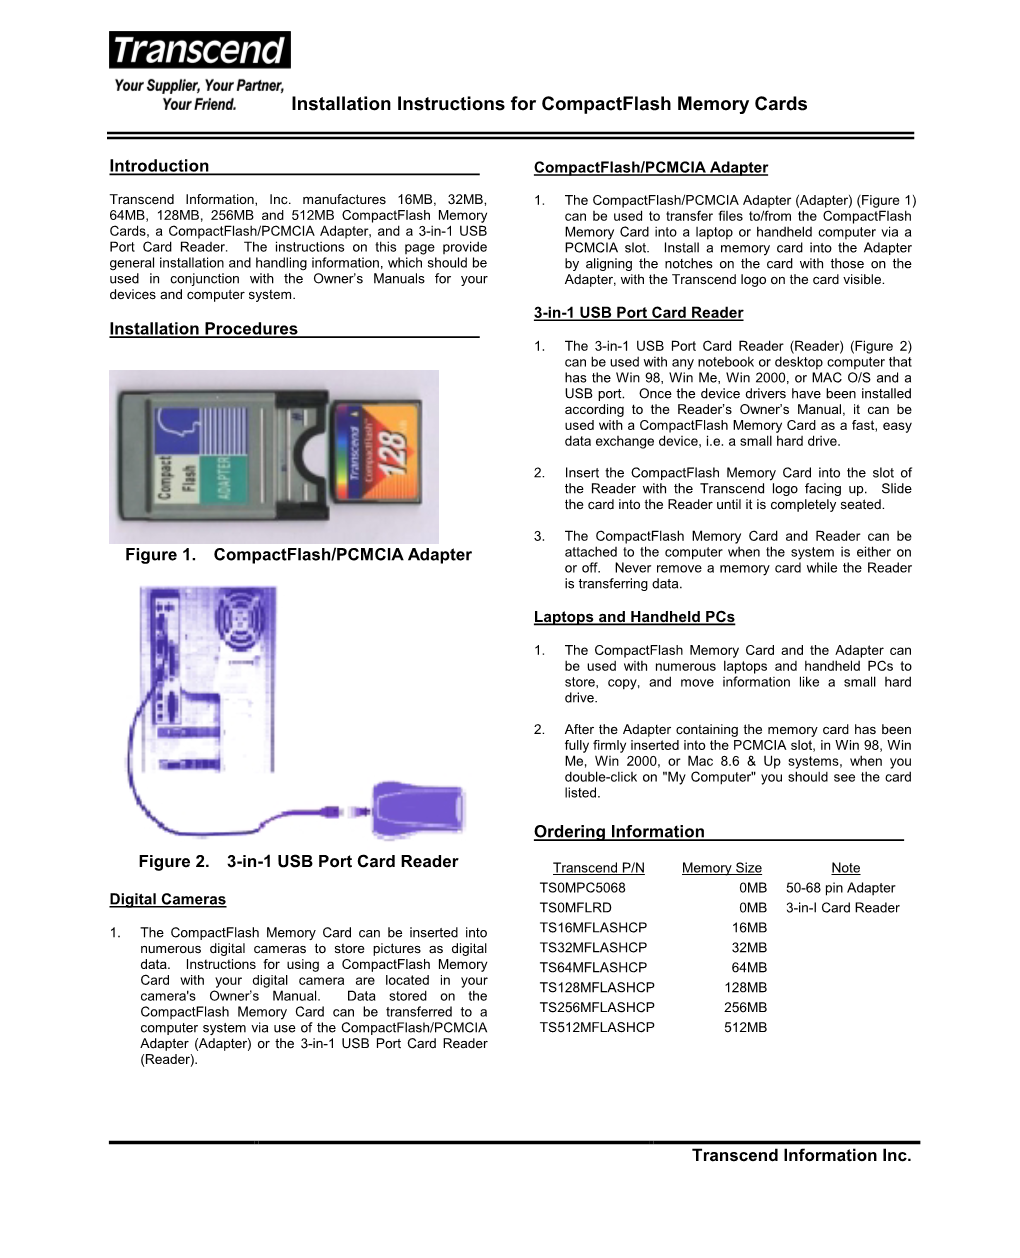 Installation Instructions for Compactflash Memory Cards